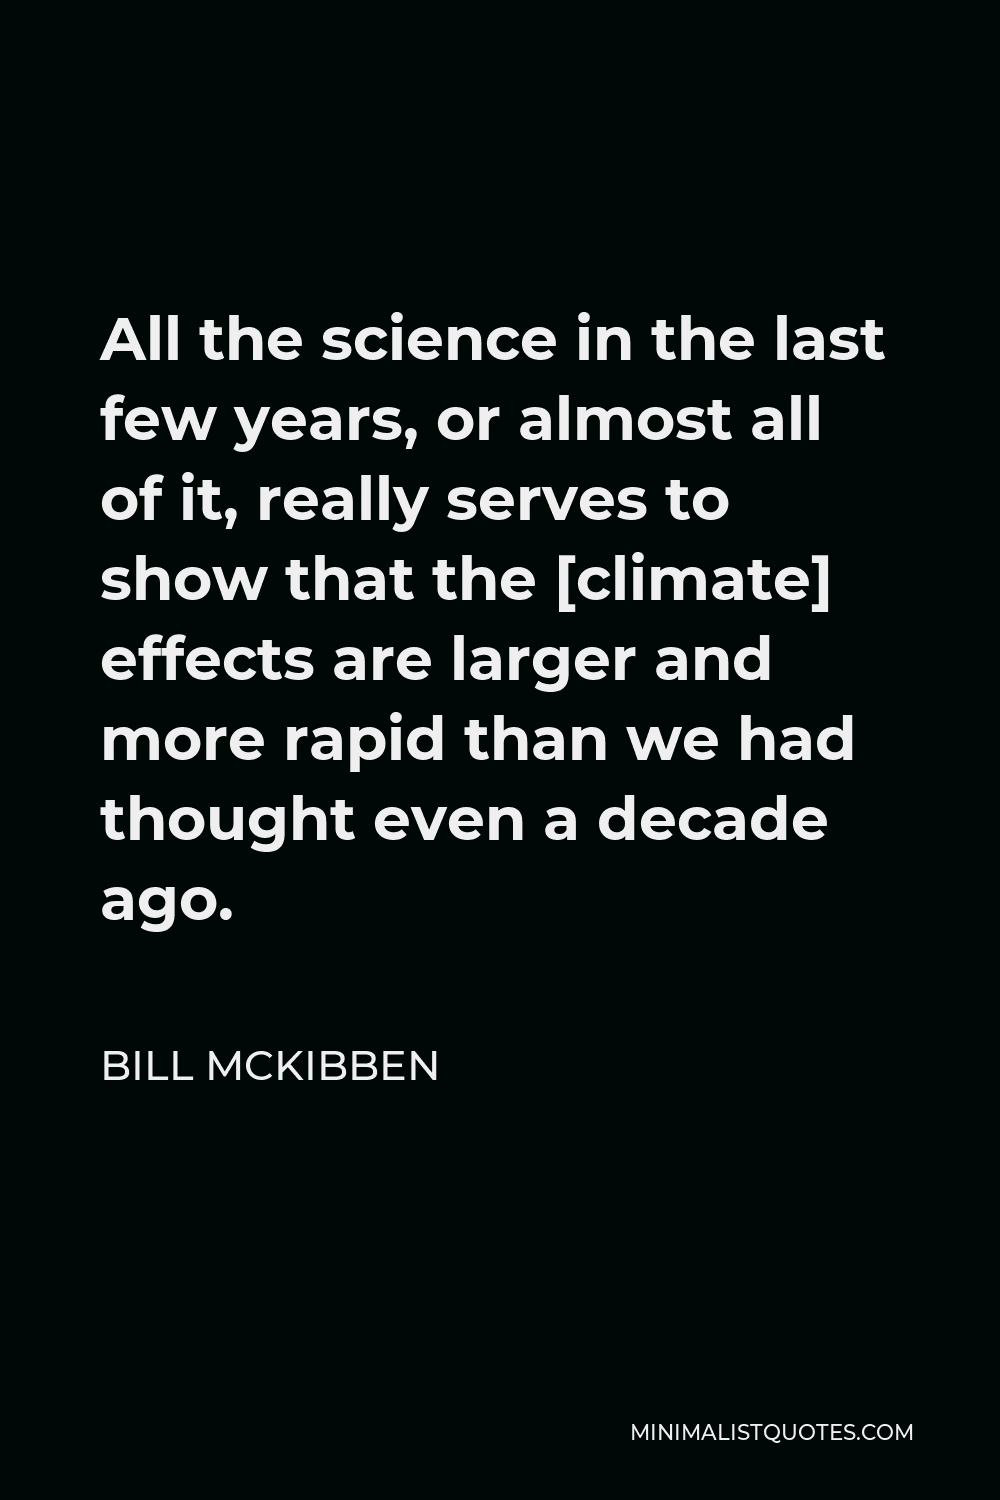 Bill McKibben Quote - All the science in the last few years, or almost all of it, really serves to show that the [climate] effects are larger and more rapid than we had thought even a decade ago.